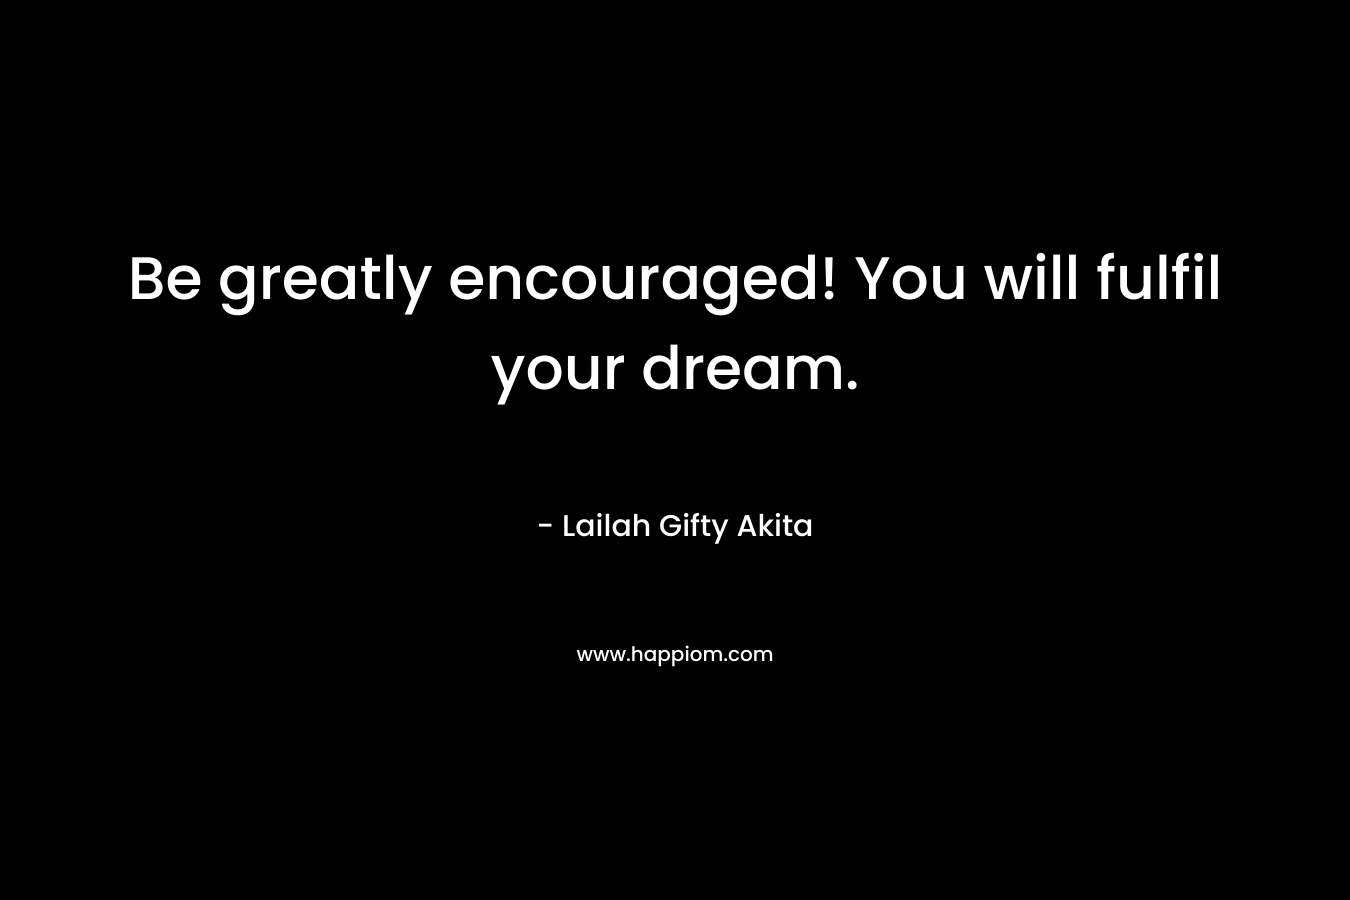 Be greatly encouraged! You will fulfil your dream.